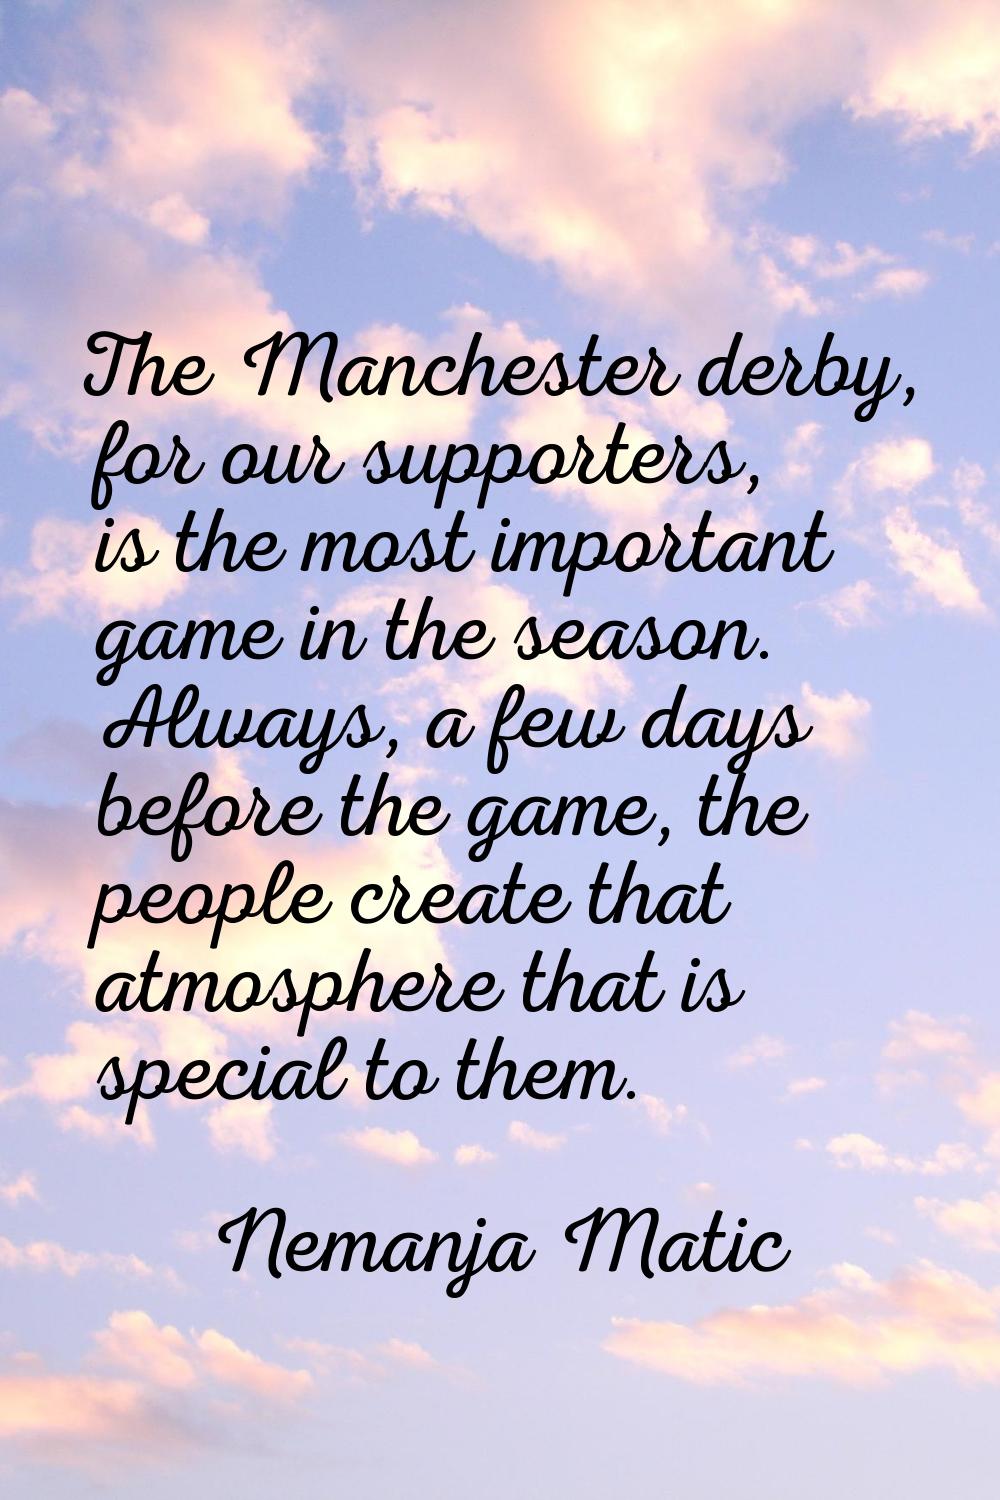 The Manchester derby, for our supporters, is the most important game in the season. Always, a few d